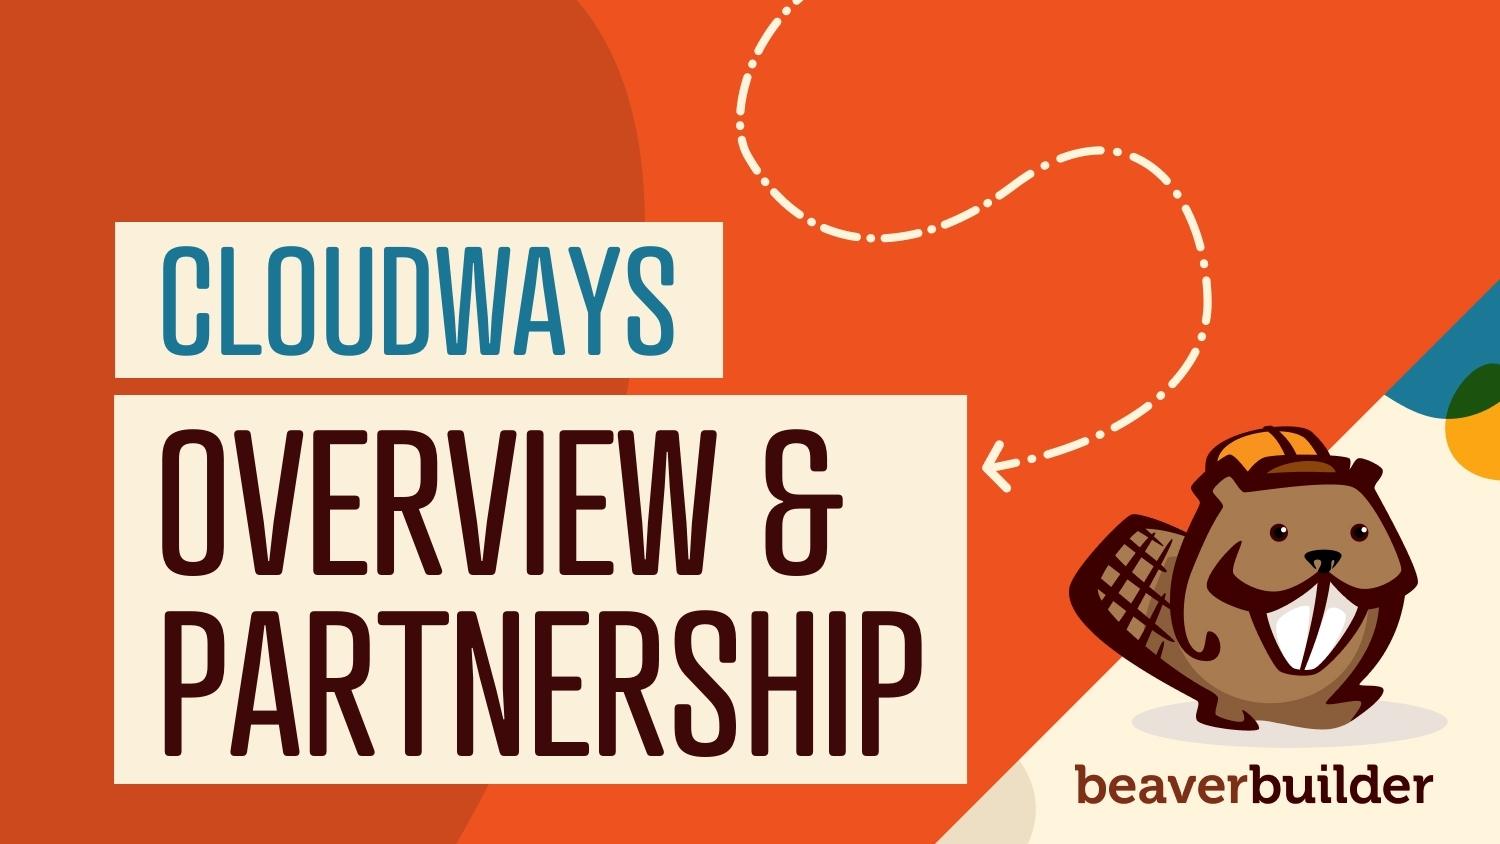 cloudways-overview-and-partnership-beaver-builder-blog